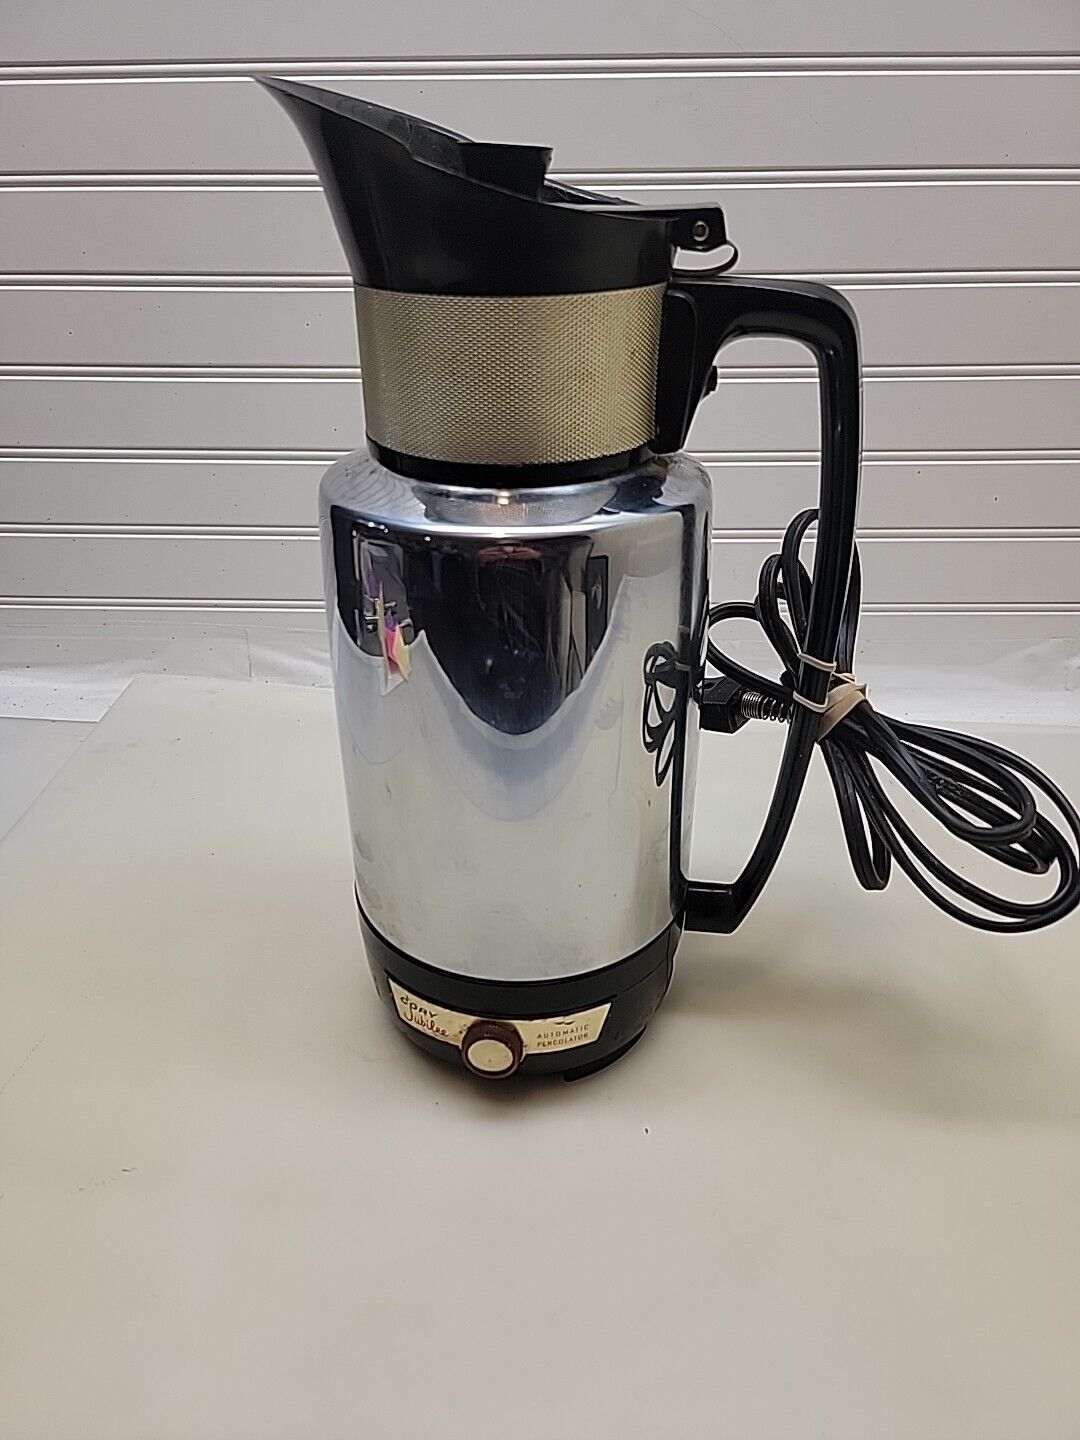 VTG Cory Jubilee Coffee Percolator 4-18 cup Electric Automatic Works